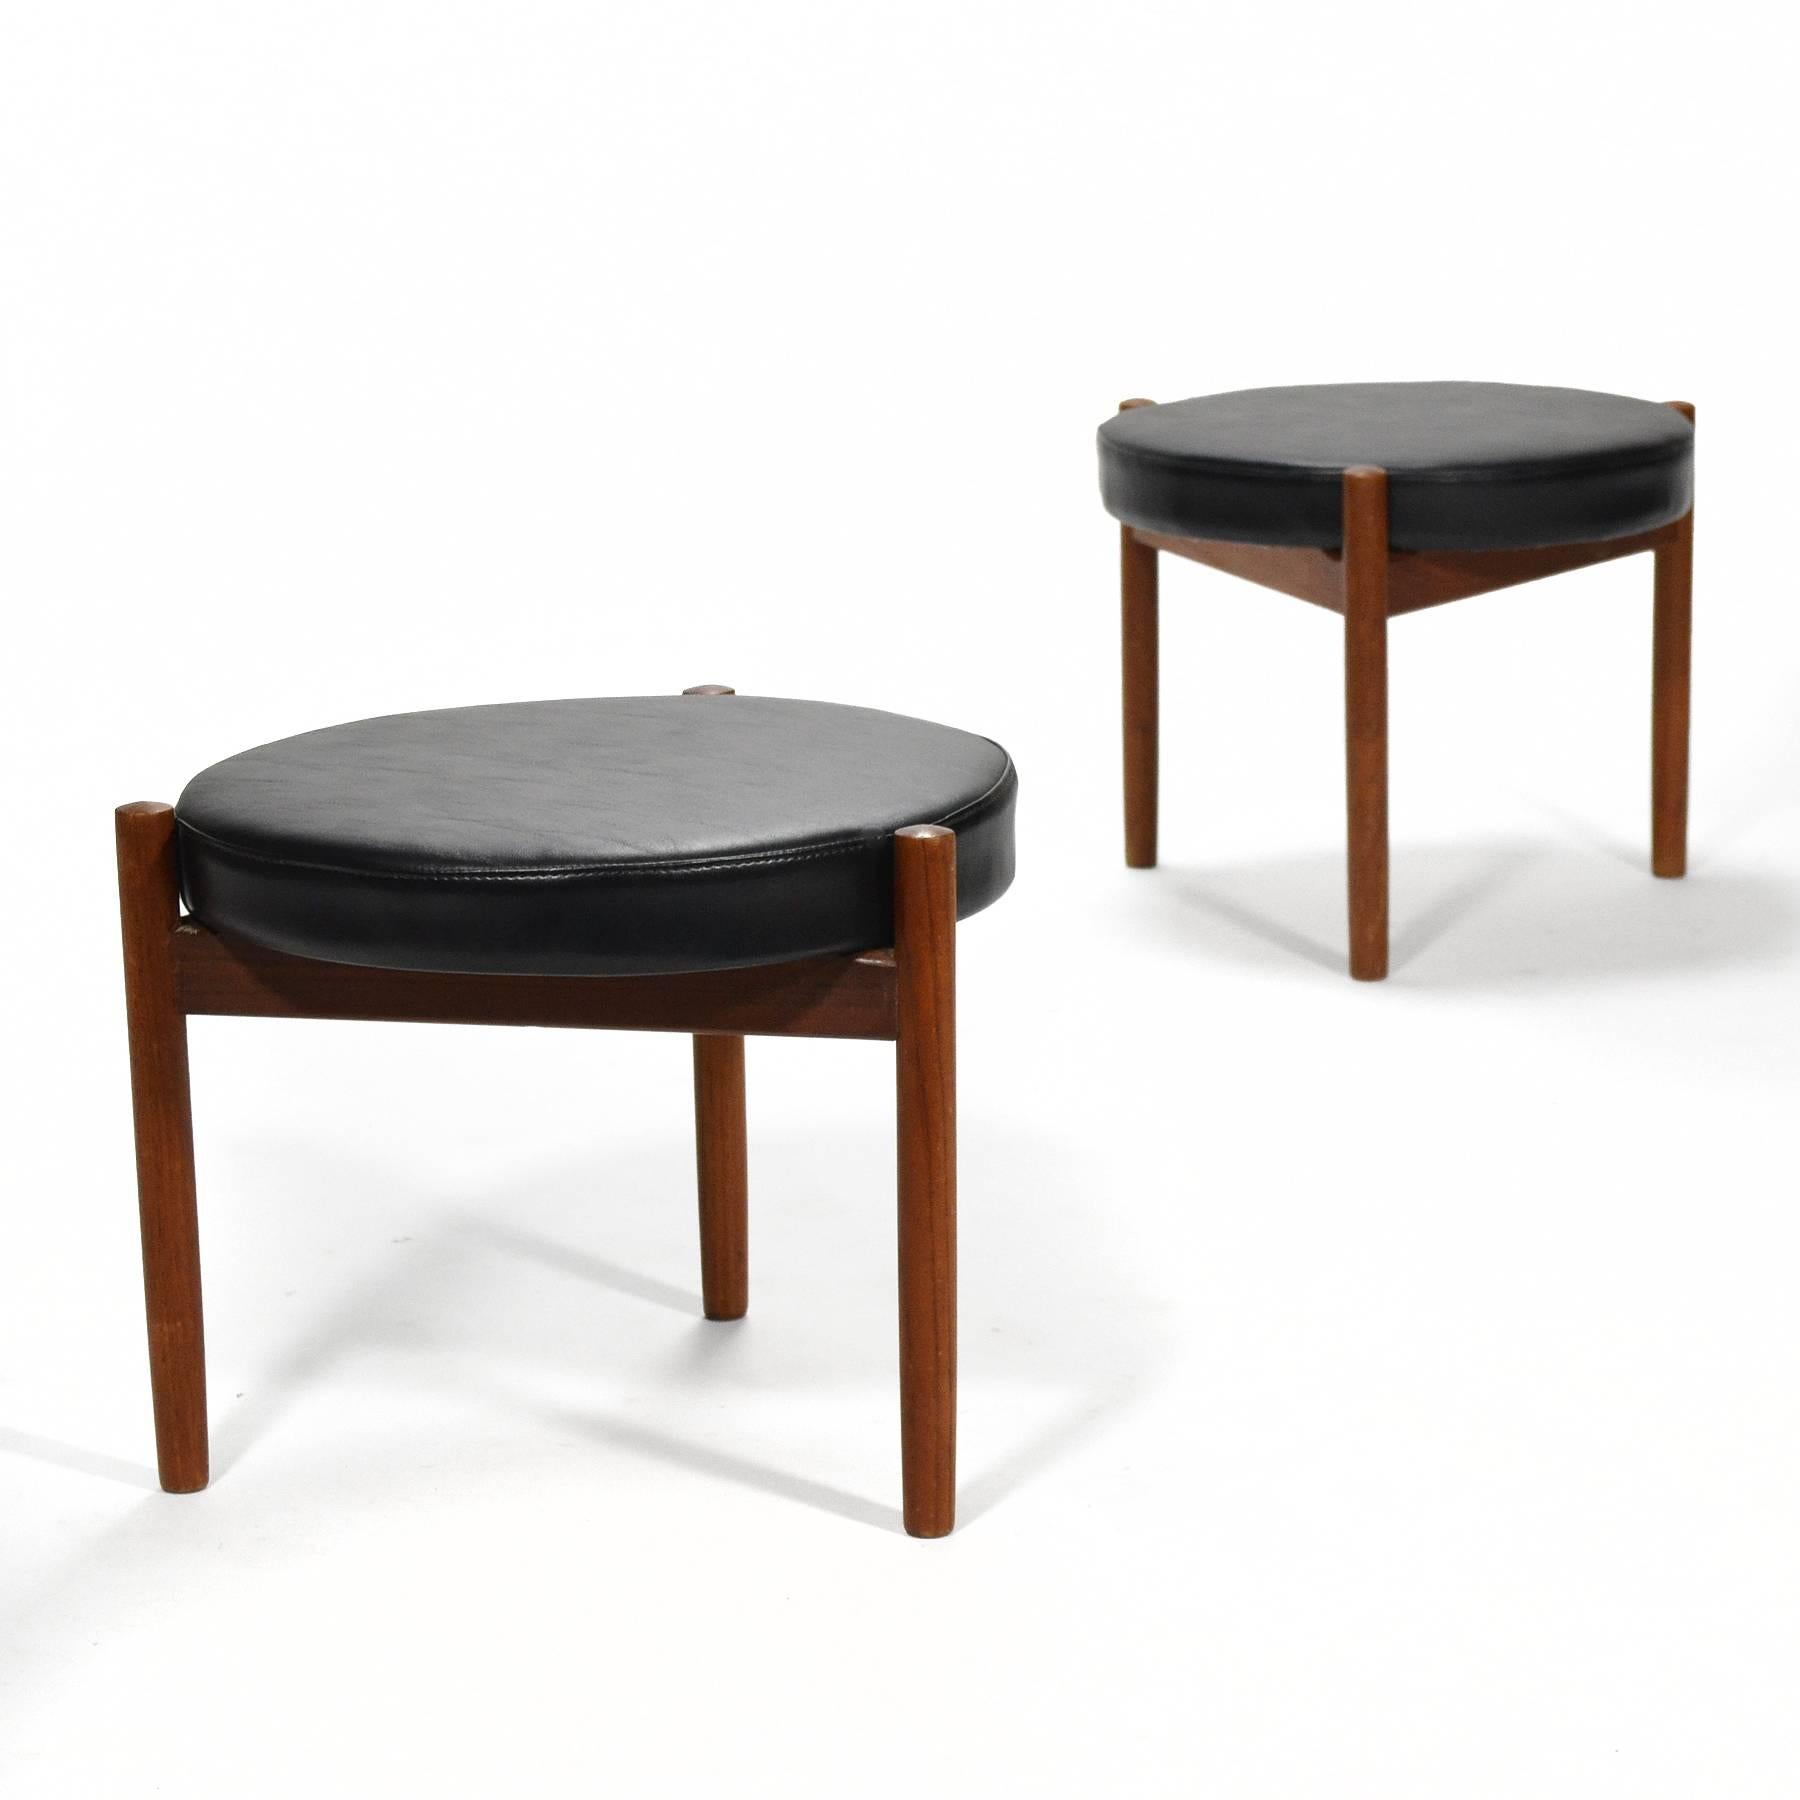 This charming and handsome pair of stools are also quite versatile. With a teak frame and legs which support and surround the seat cushion, they have a nice sculptural quality and a scale that makes them perfect occasional pieces. They function as